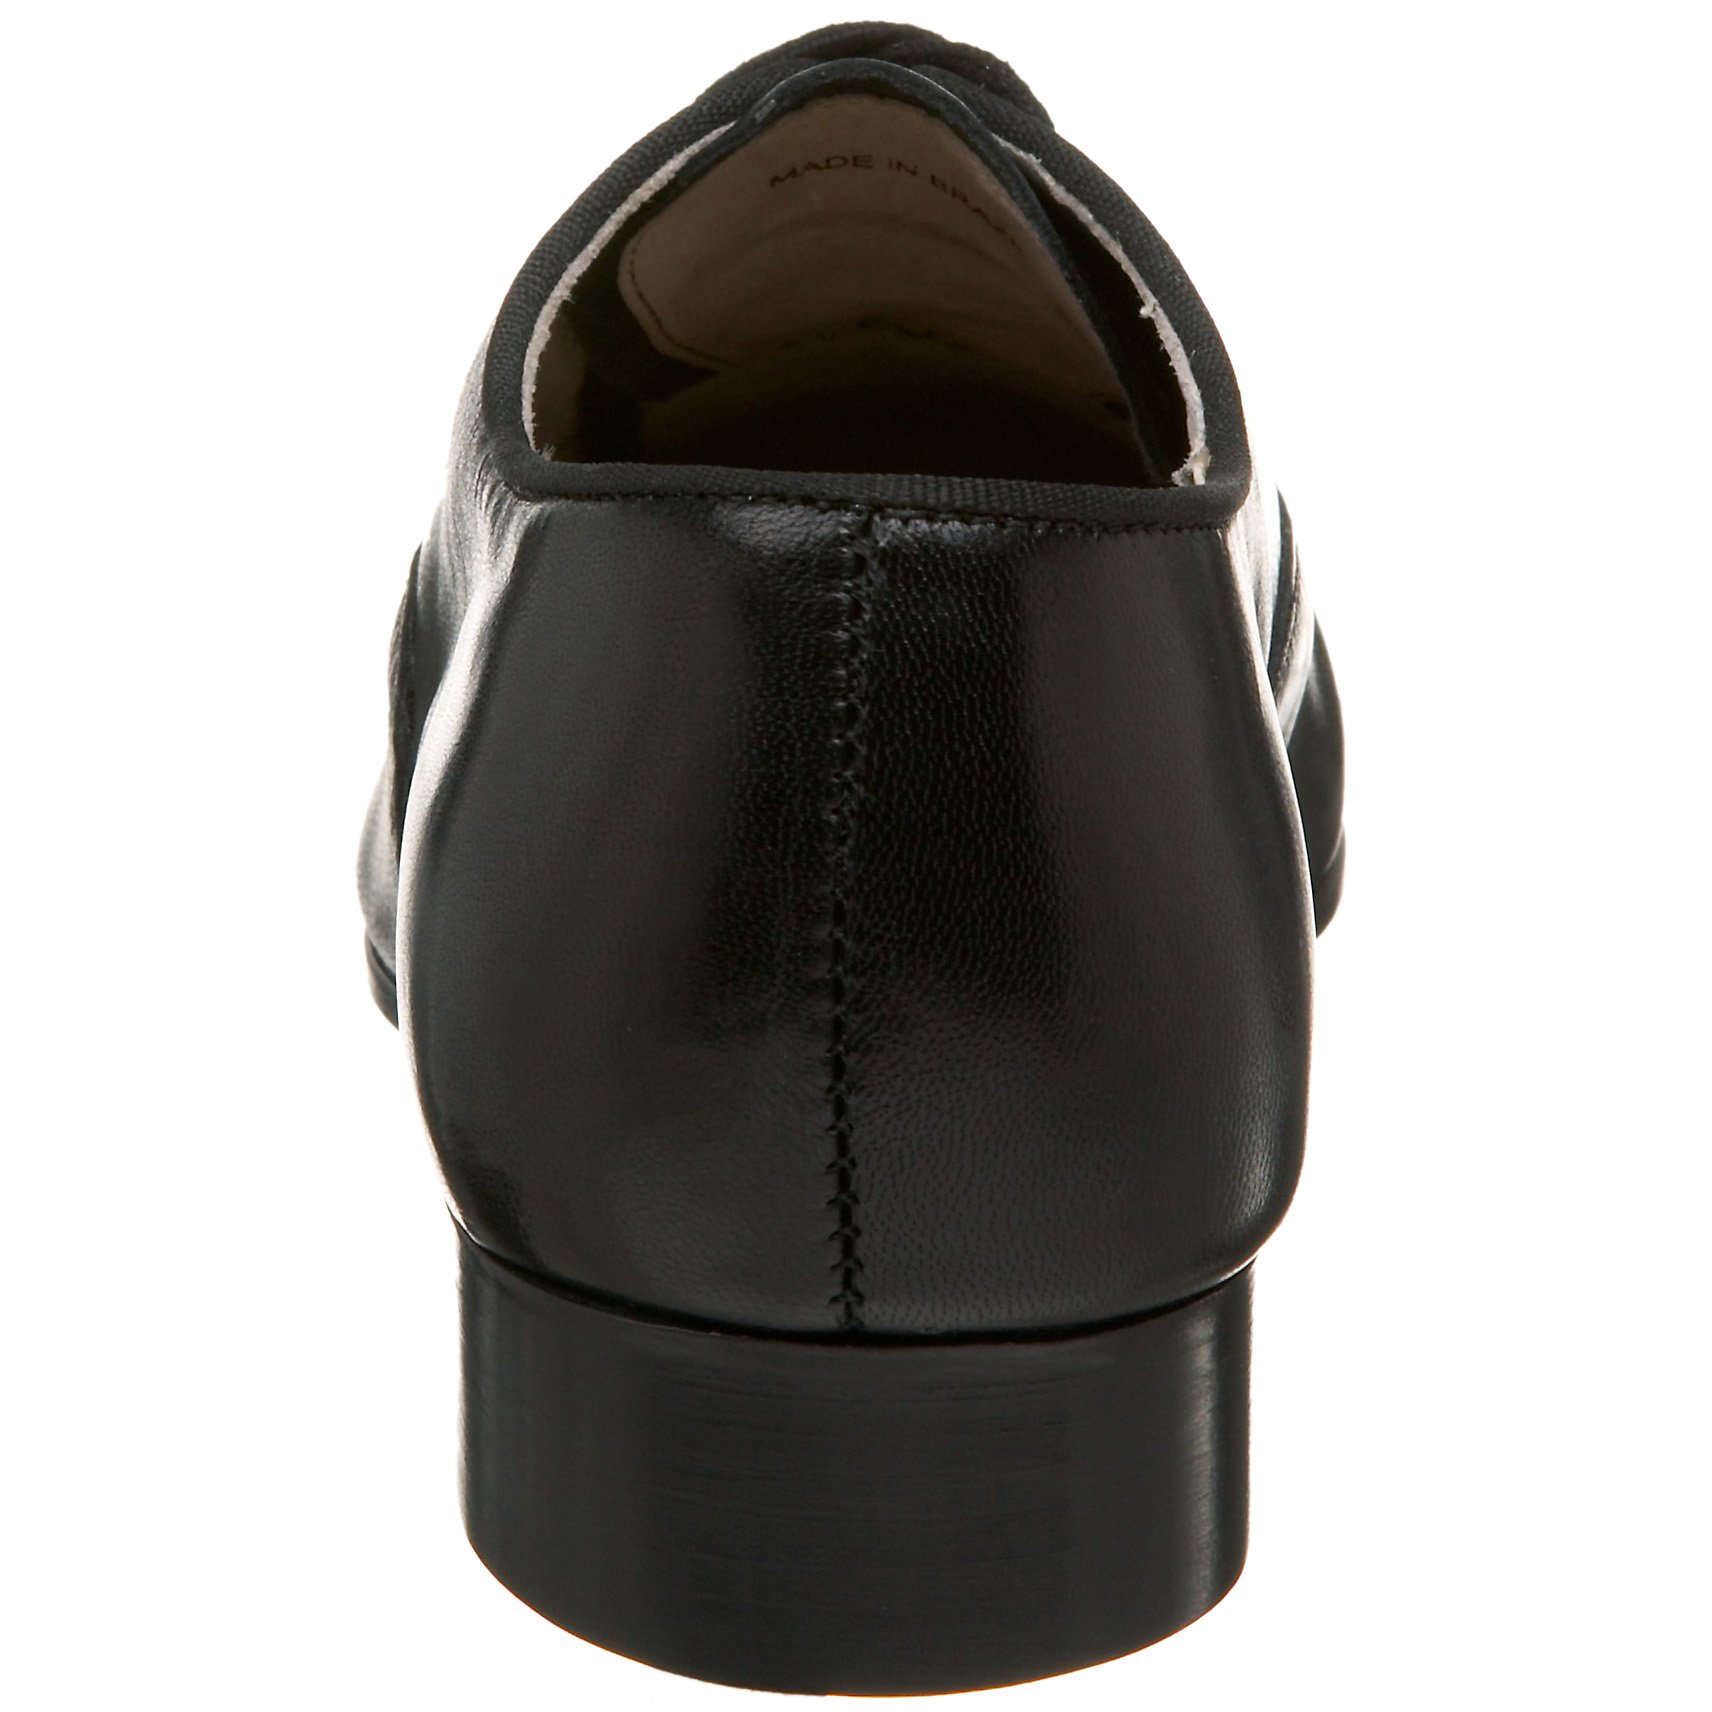 Capezio unisex-adult Character/Tap Theatrical Oxford,Black,7 W US